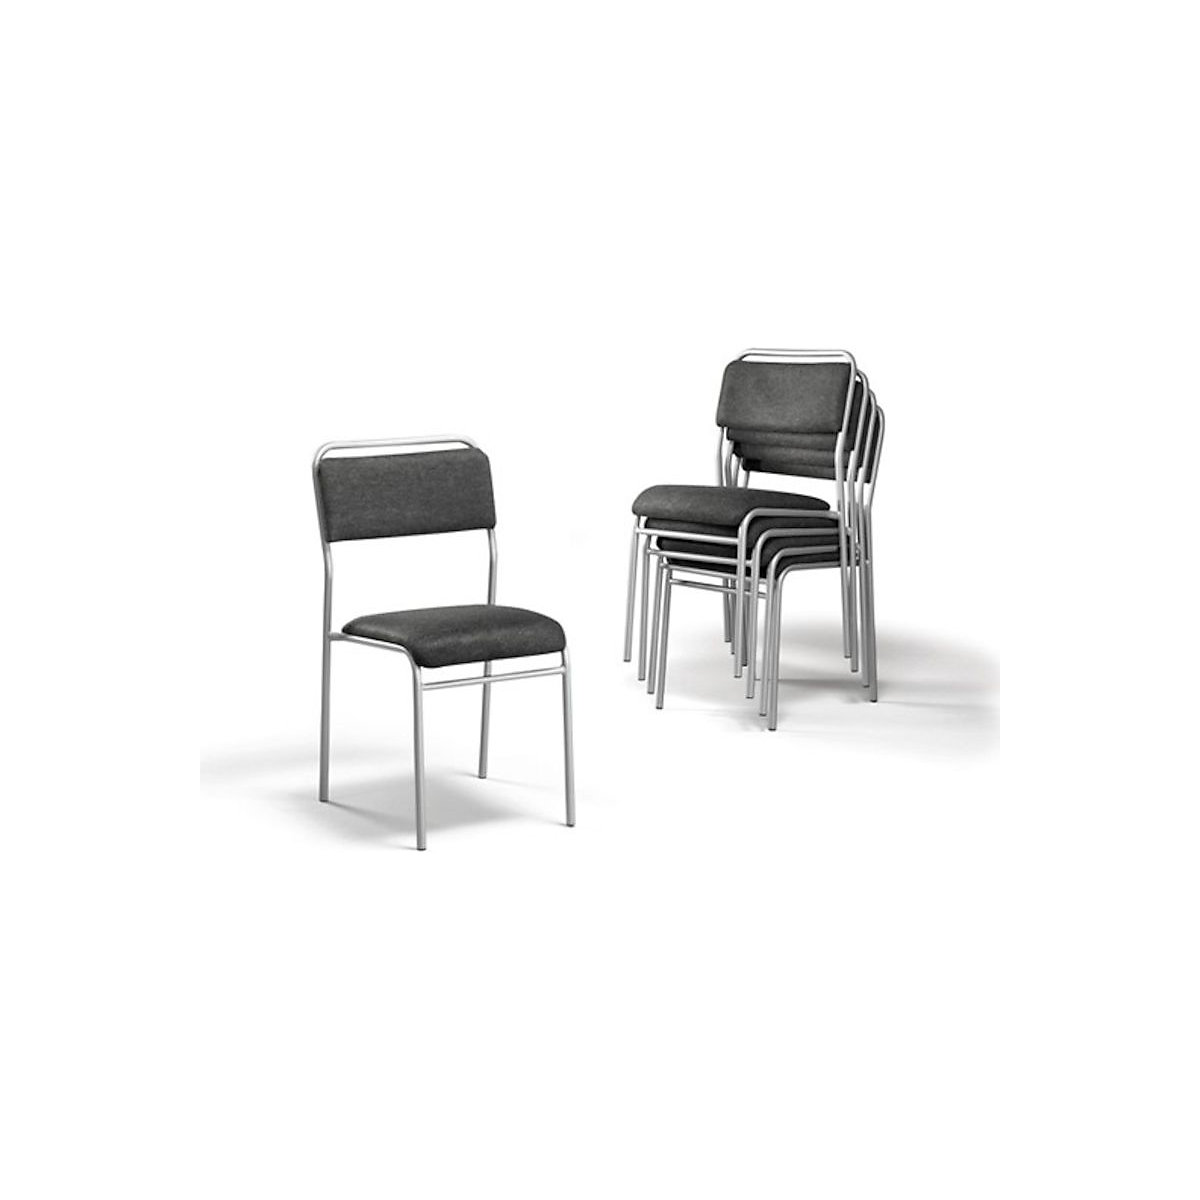 Conference chair without arm rests